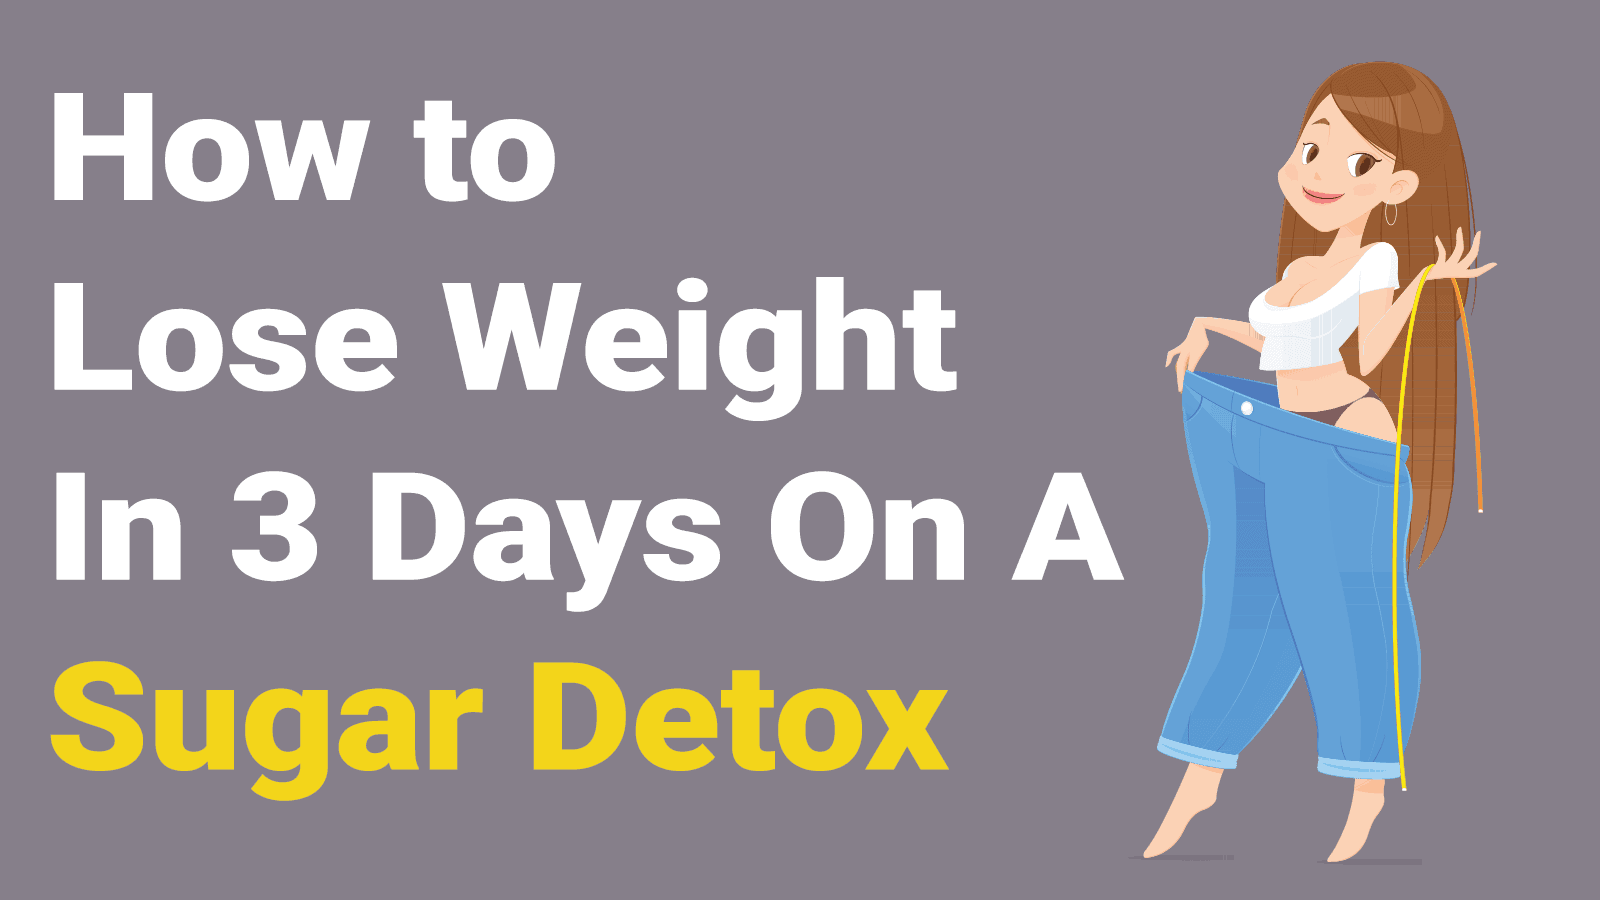 How to Lose Weight In 3 Days On A Sugar Detox